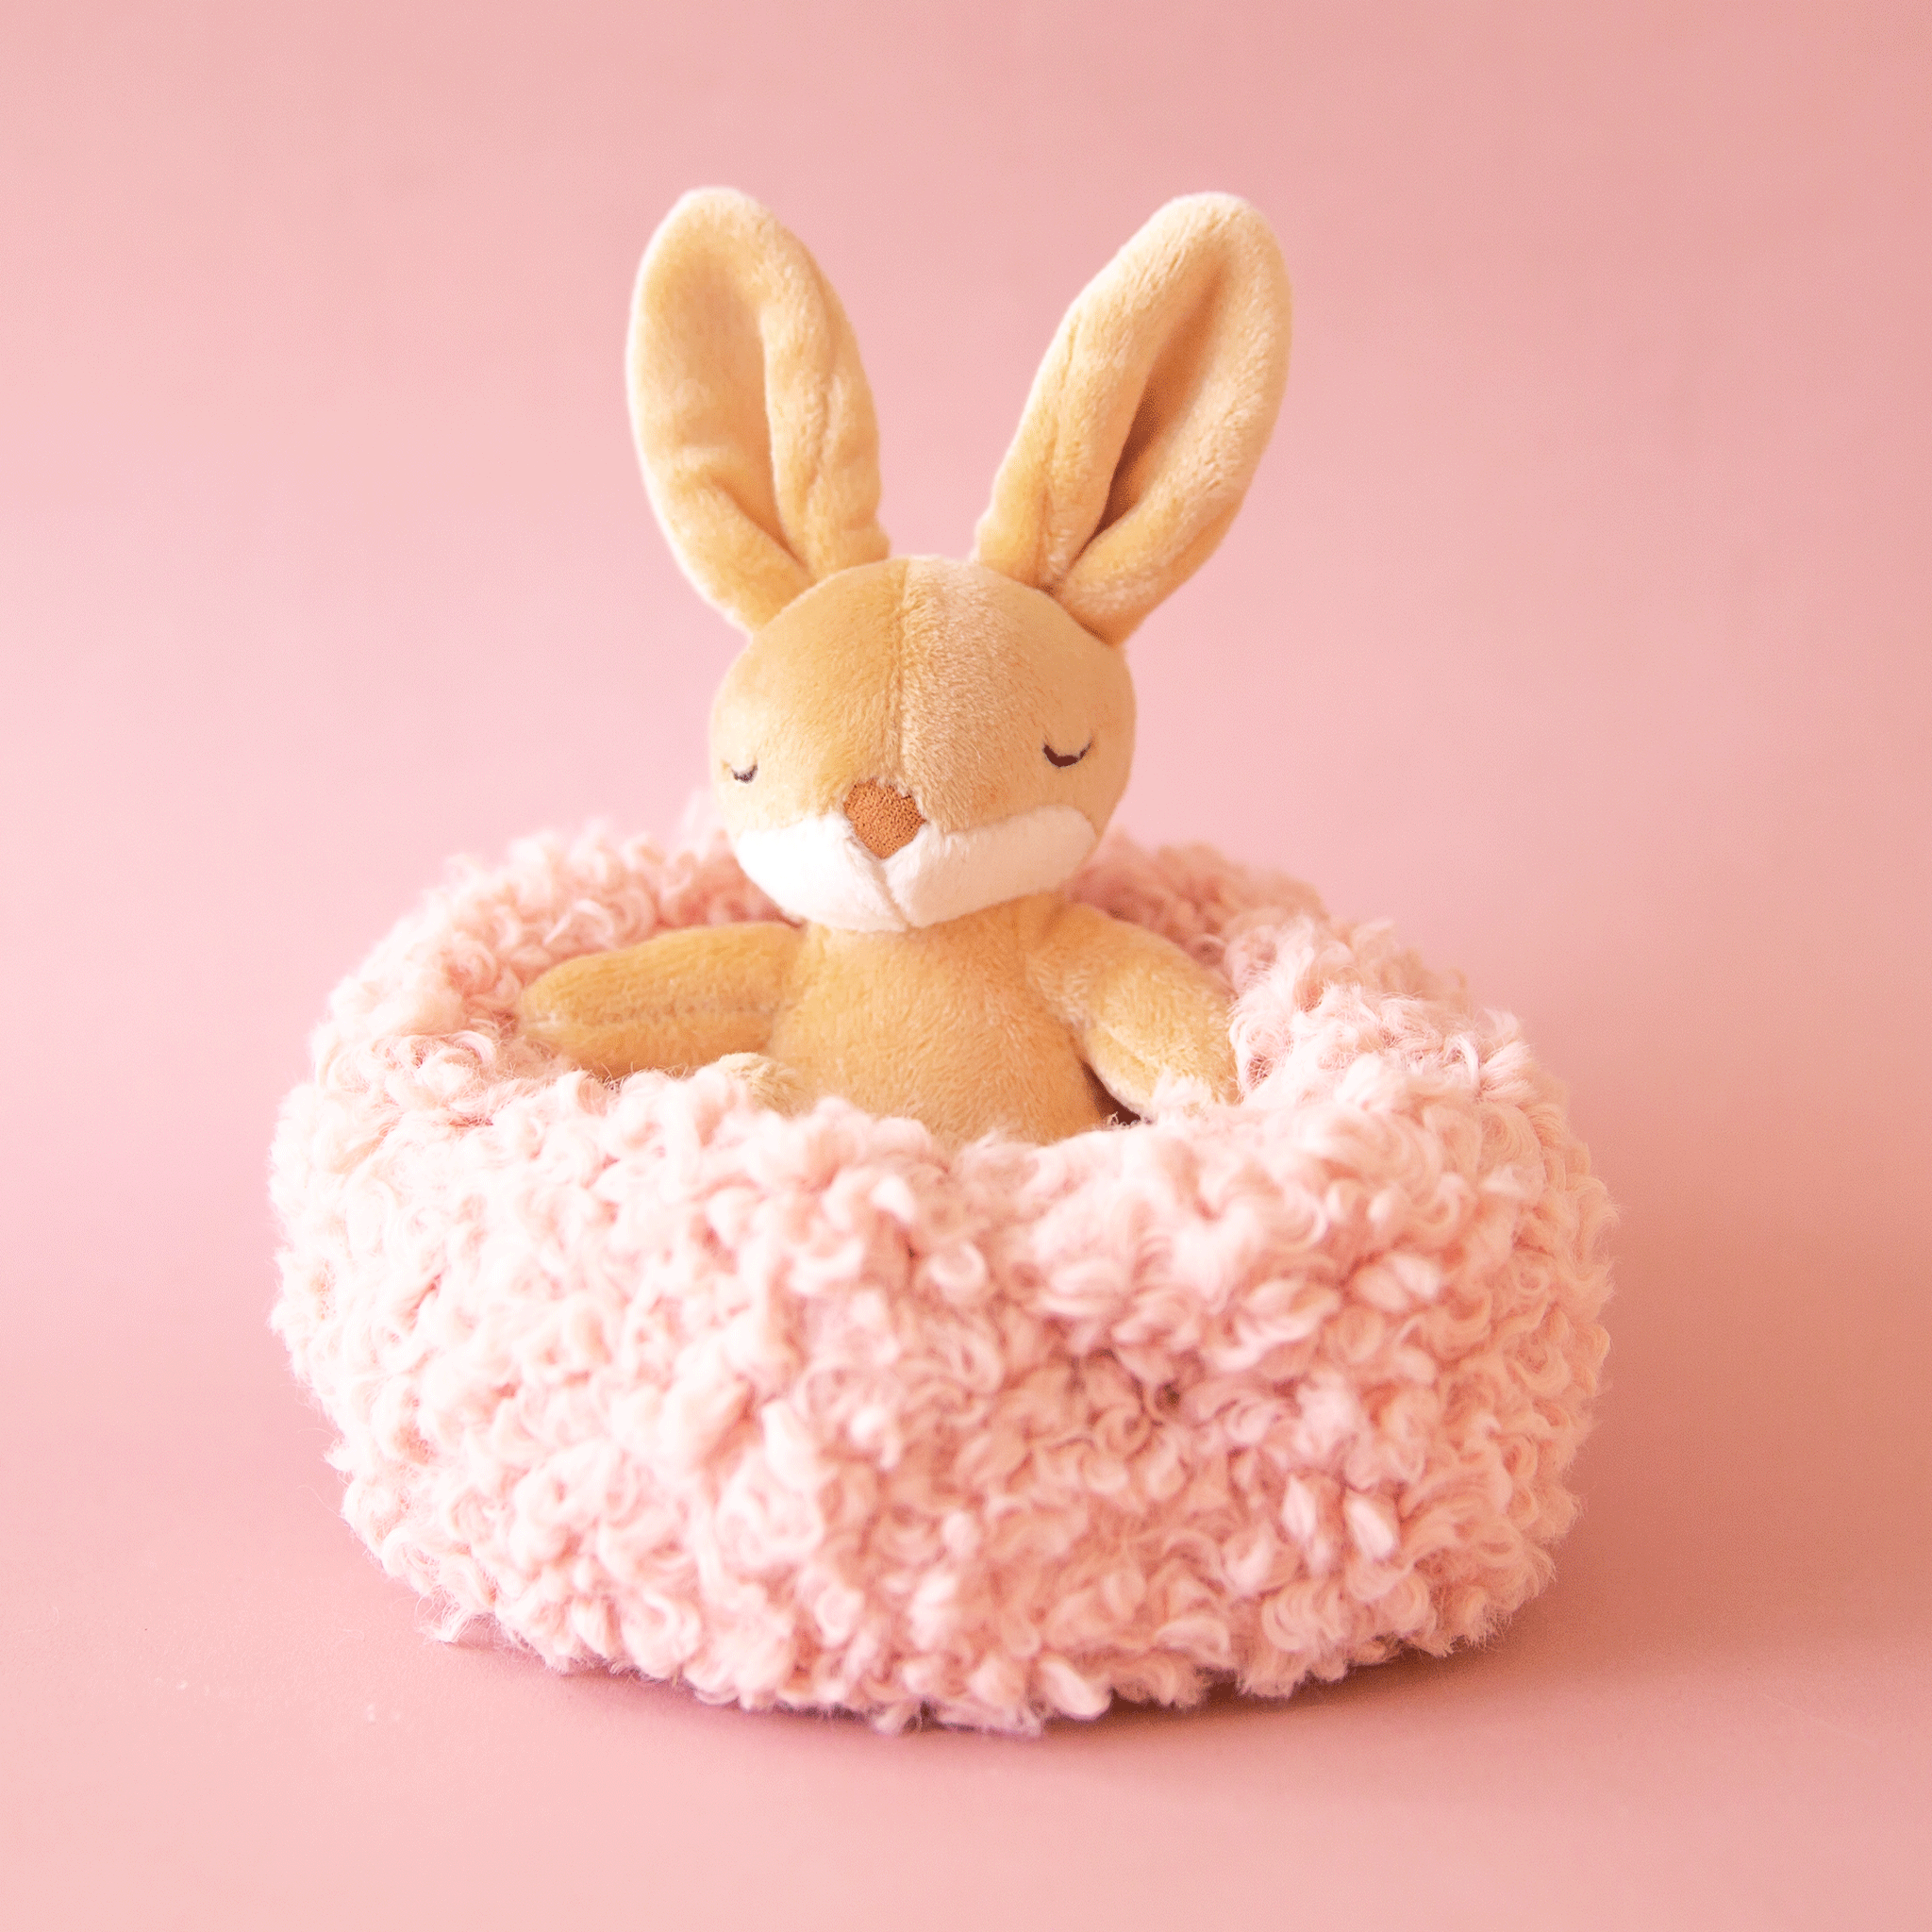 On a pink background is a small bunny stuffed animal in a tan shade sitting inside of a light pink / tan fuzzy nest. 